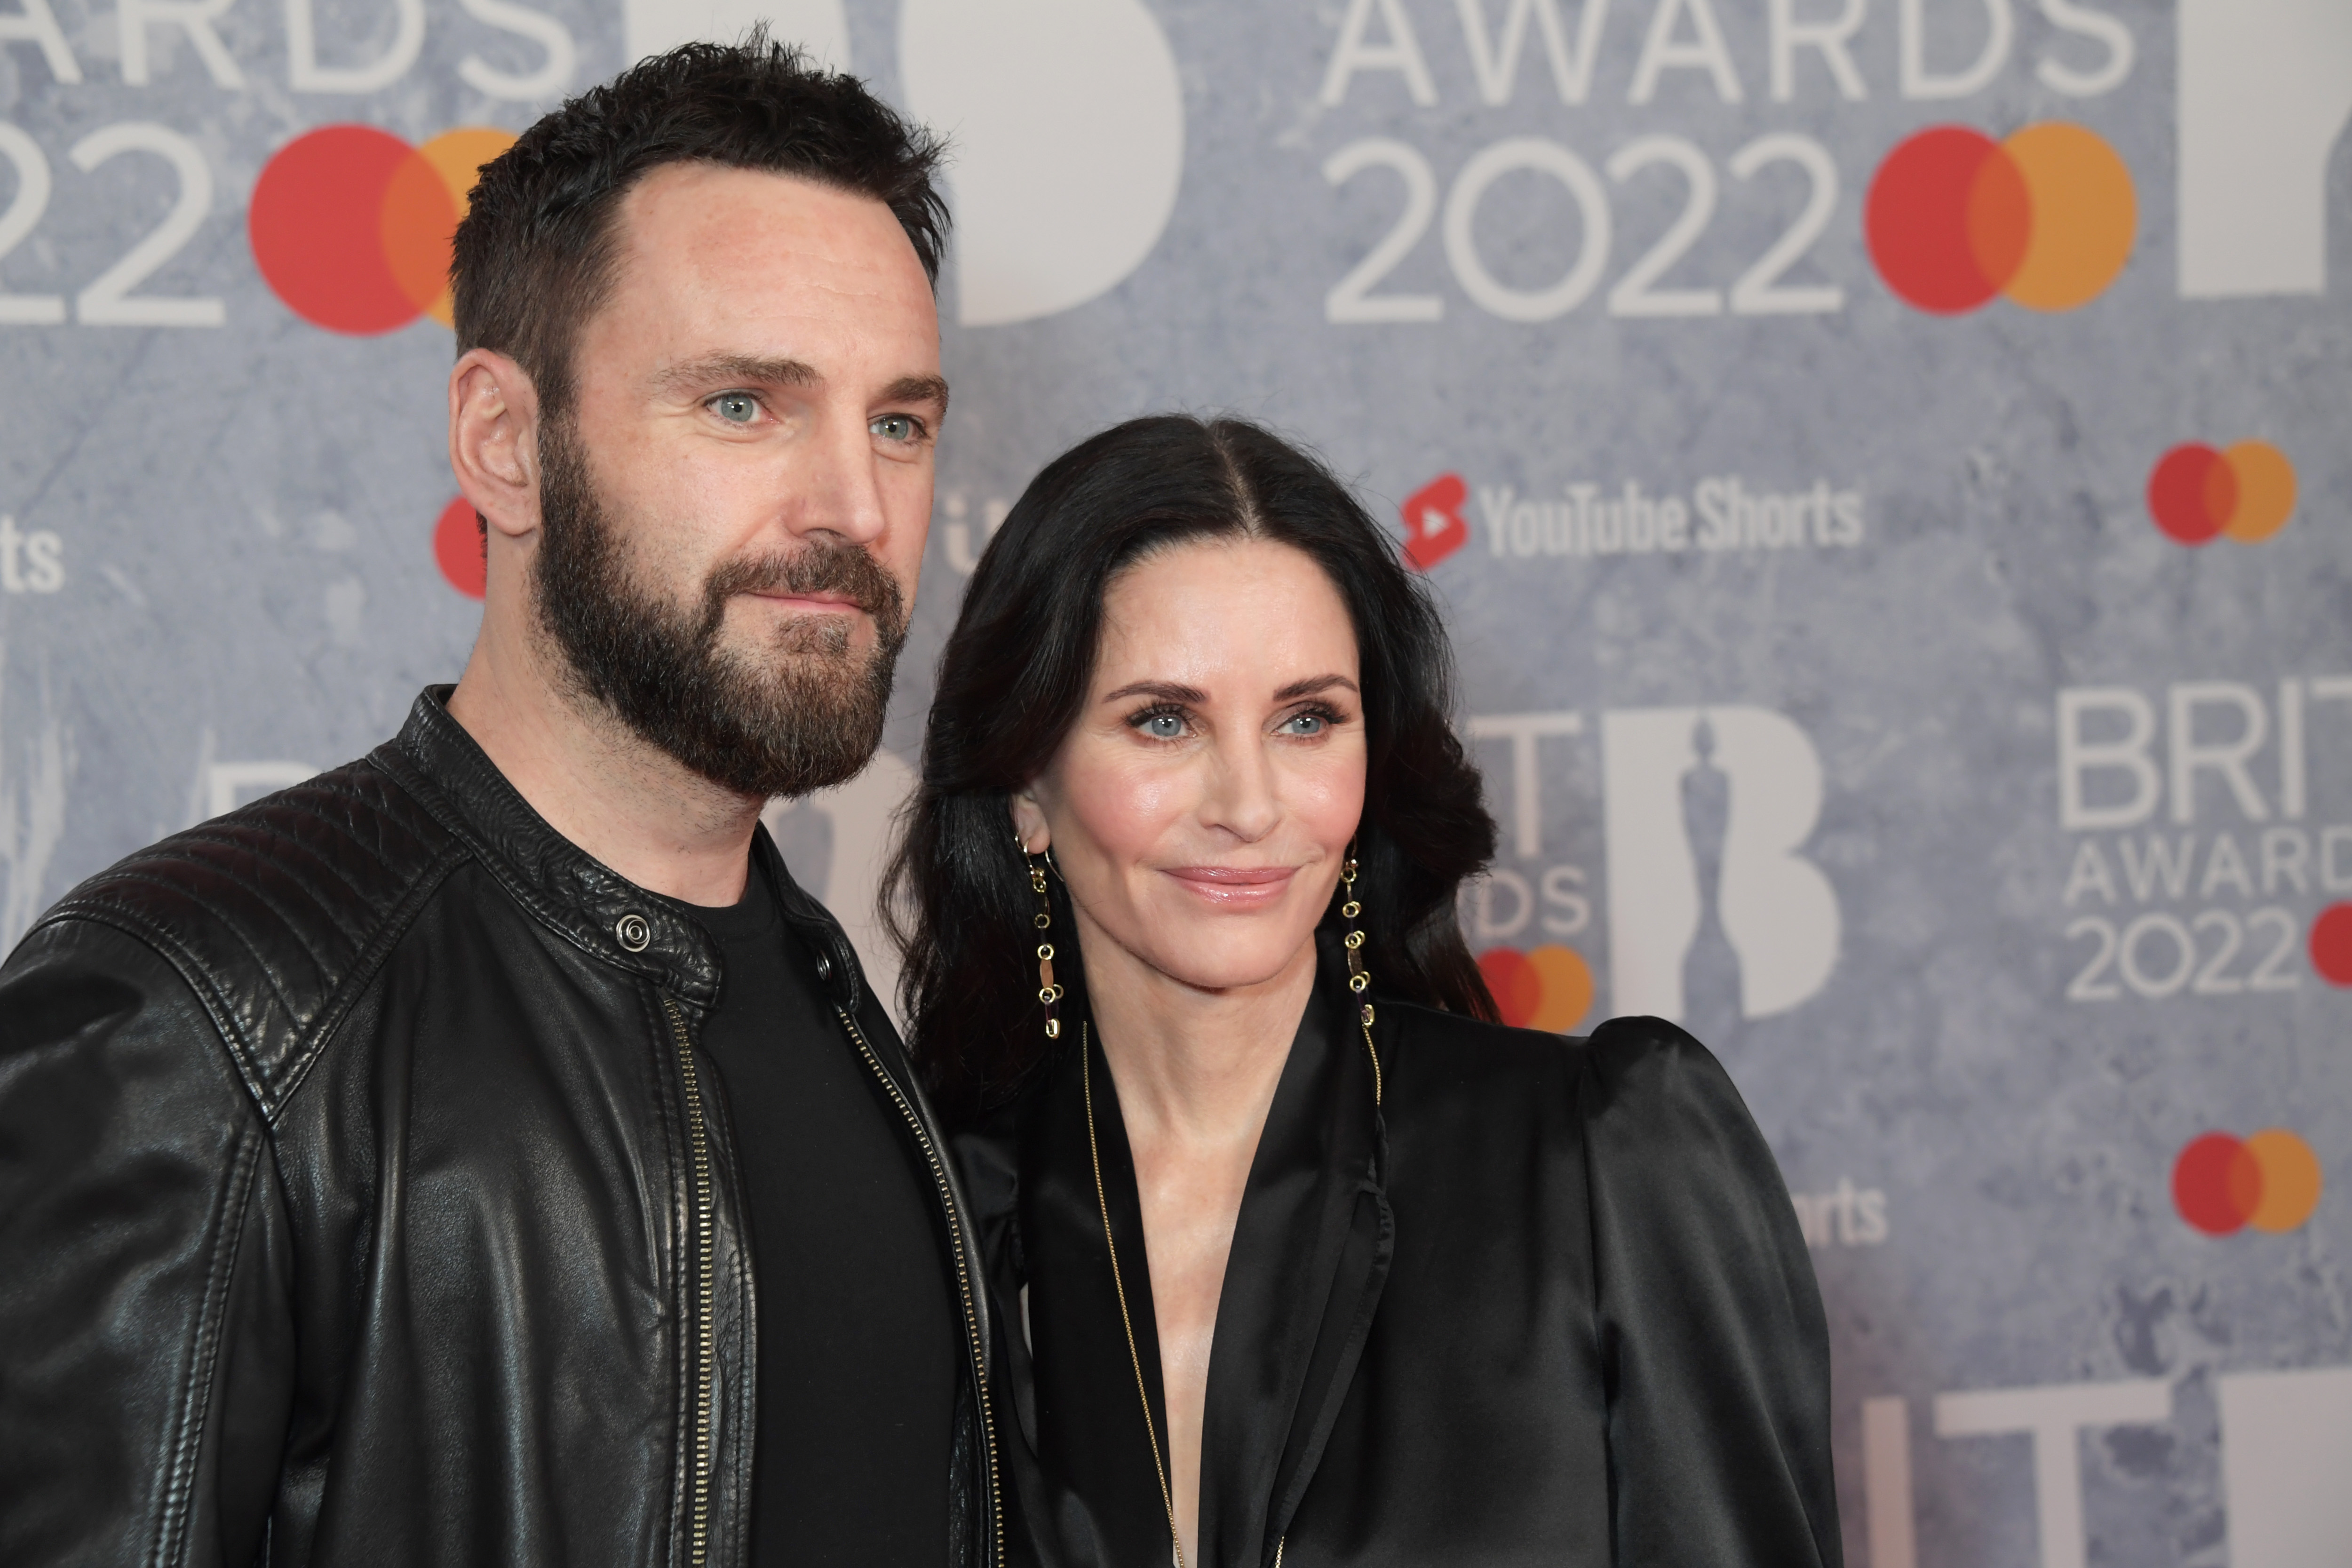 Johnny McDaid and Courteney Cox during The BRIT Awards 2022 at The O2 Arena on February 8, 2022, in London, England. | Source: Getty Images